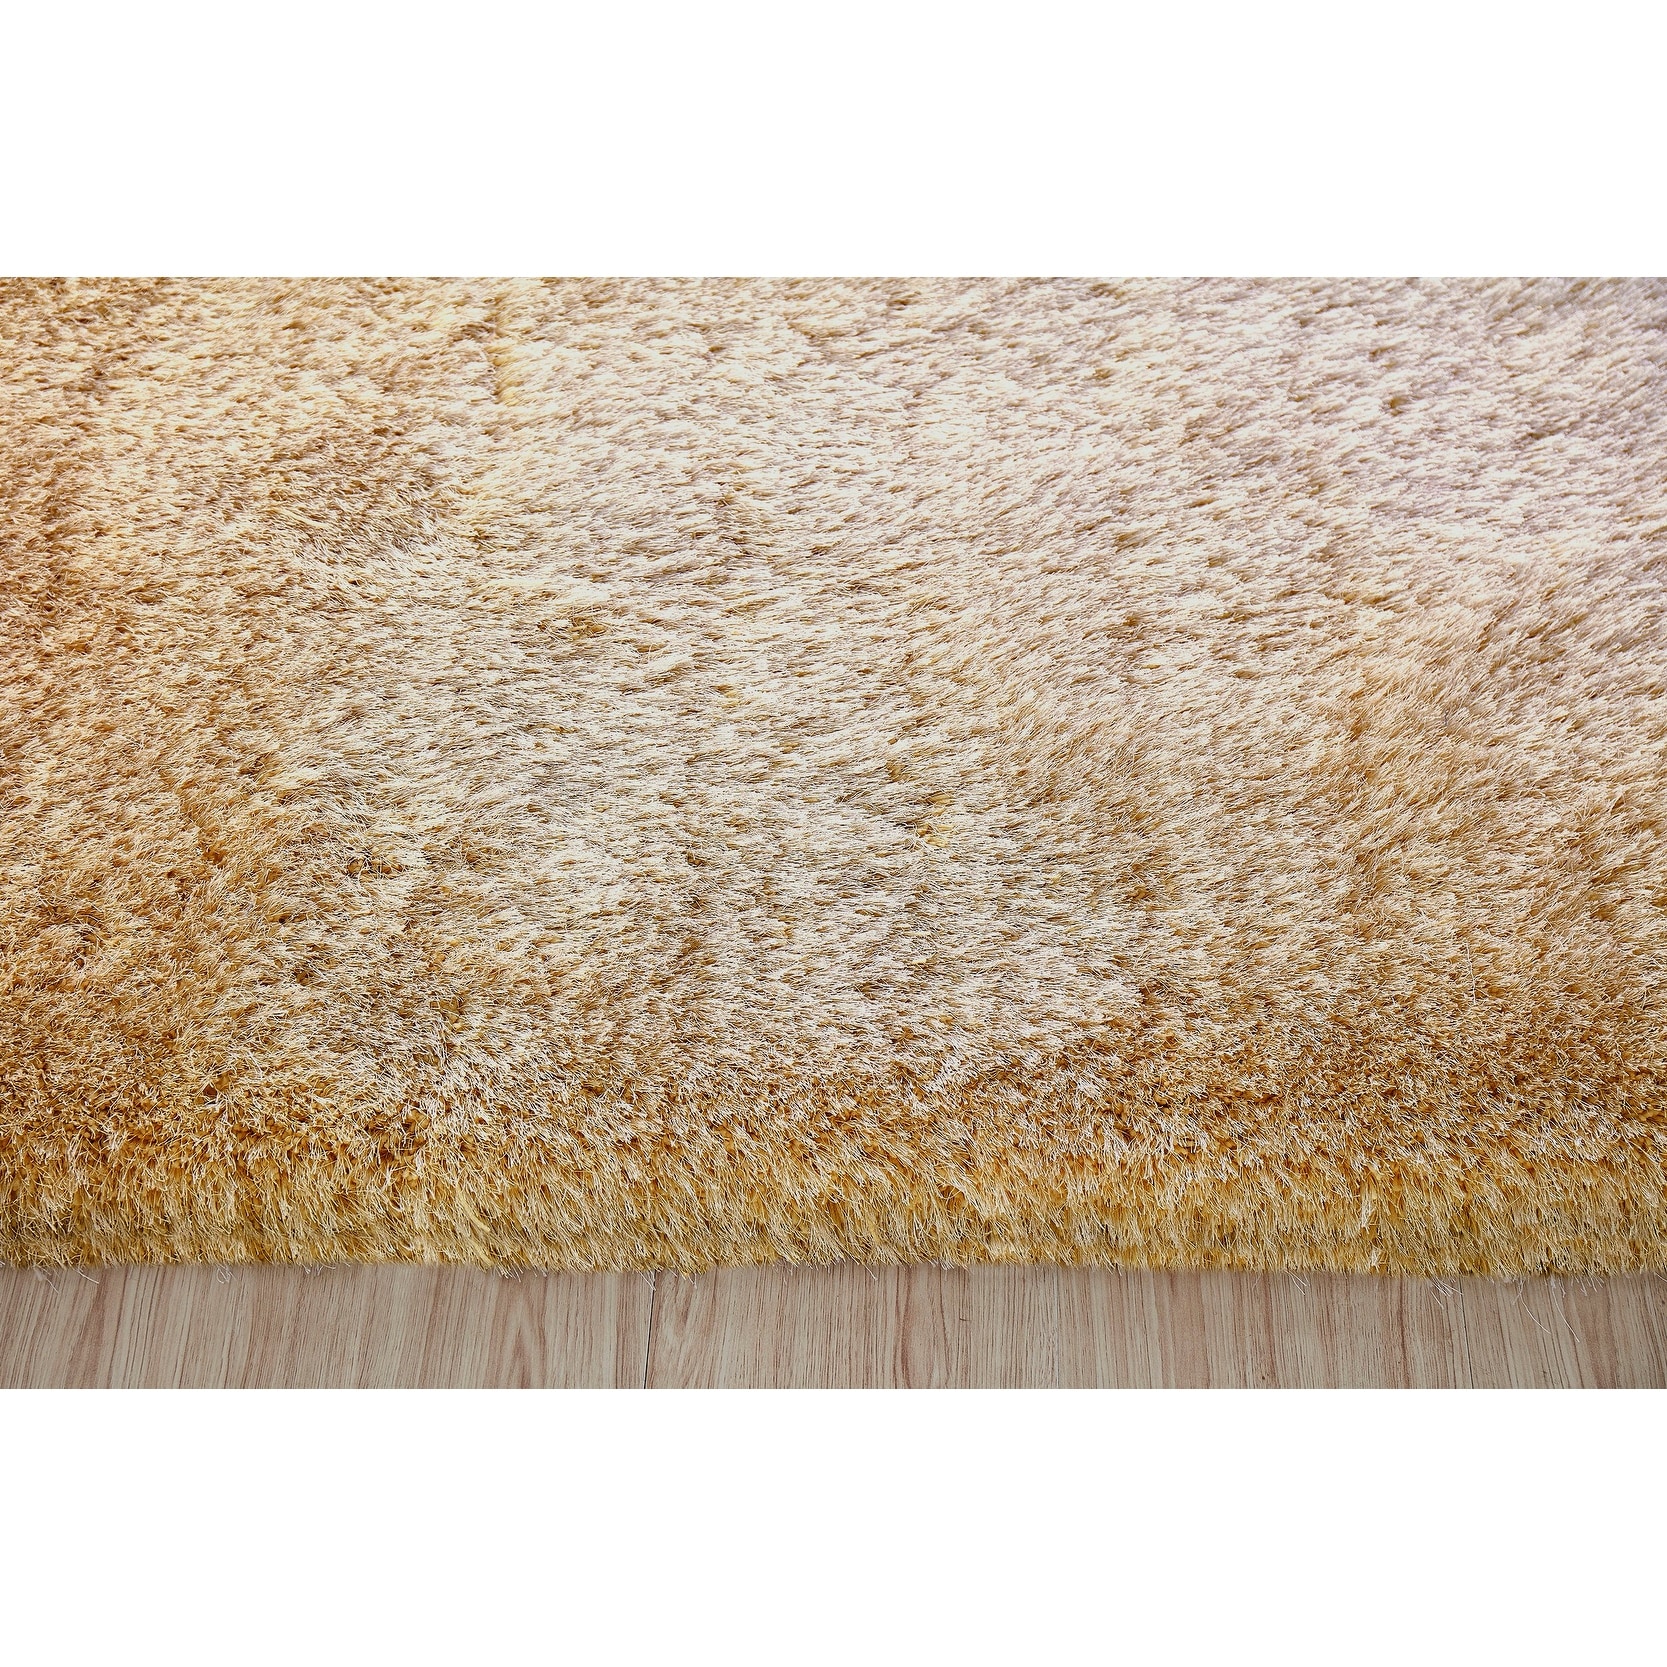 Soft Fluffy Thick Dense Pile Solid Beige Gold Non-Skid Shaggy Shag Pile Area Rug 